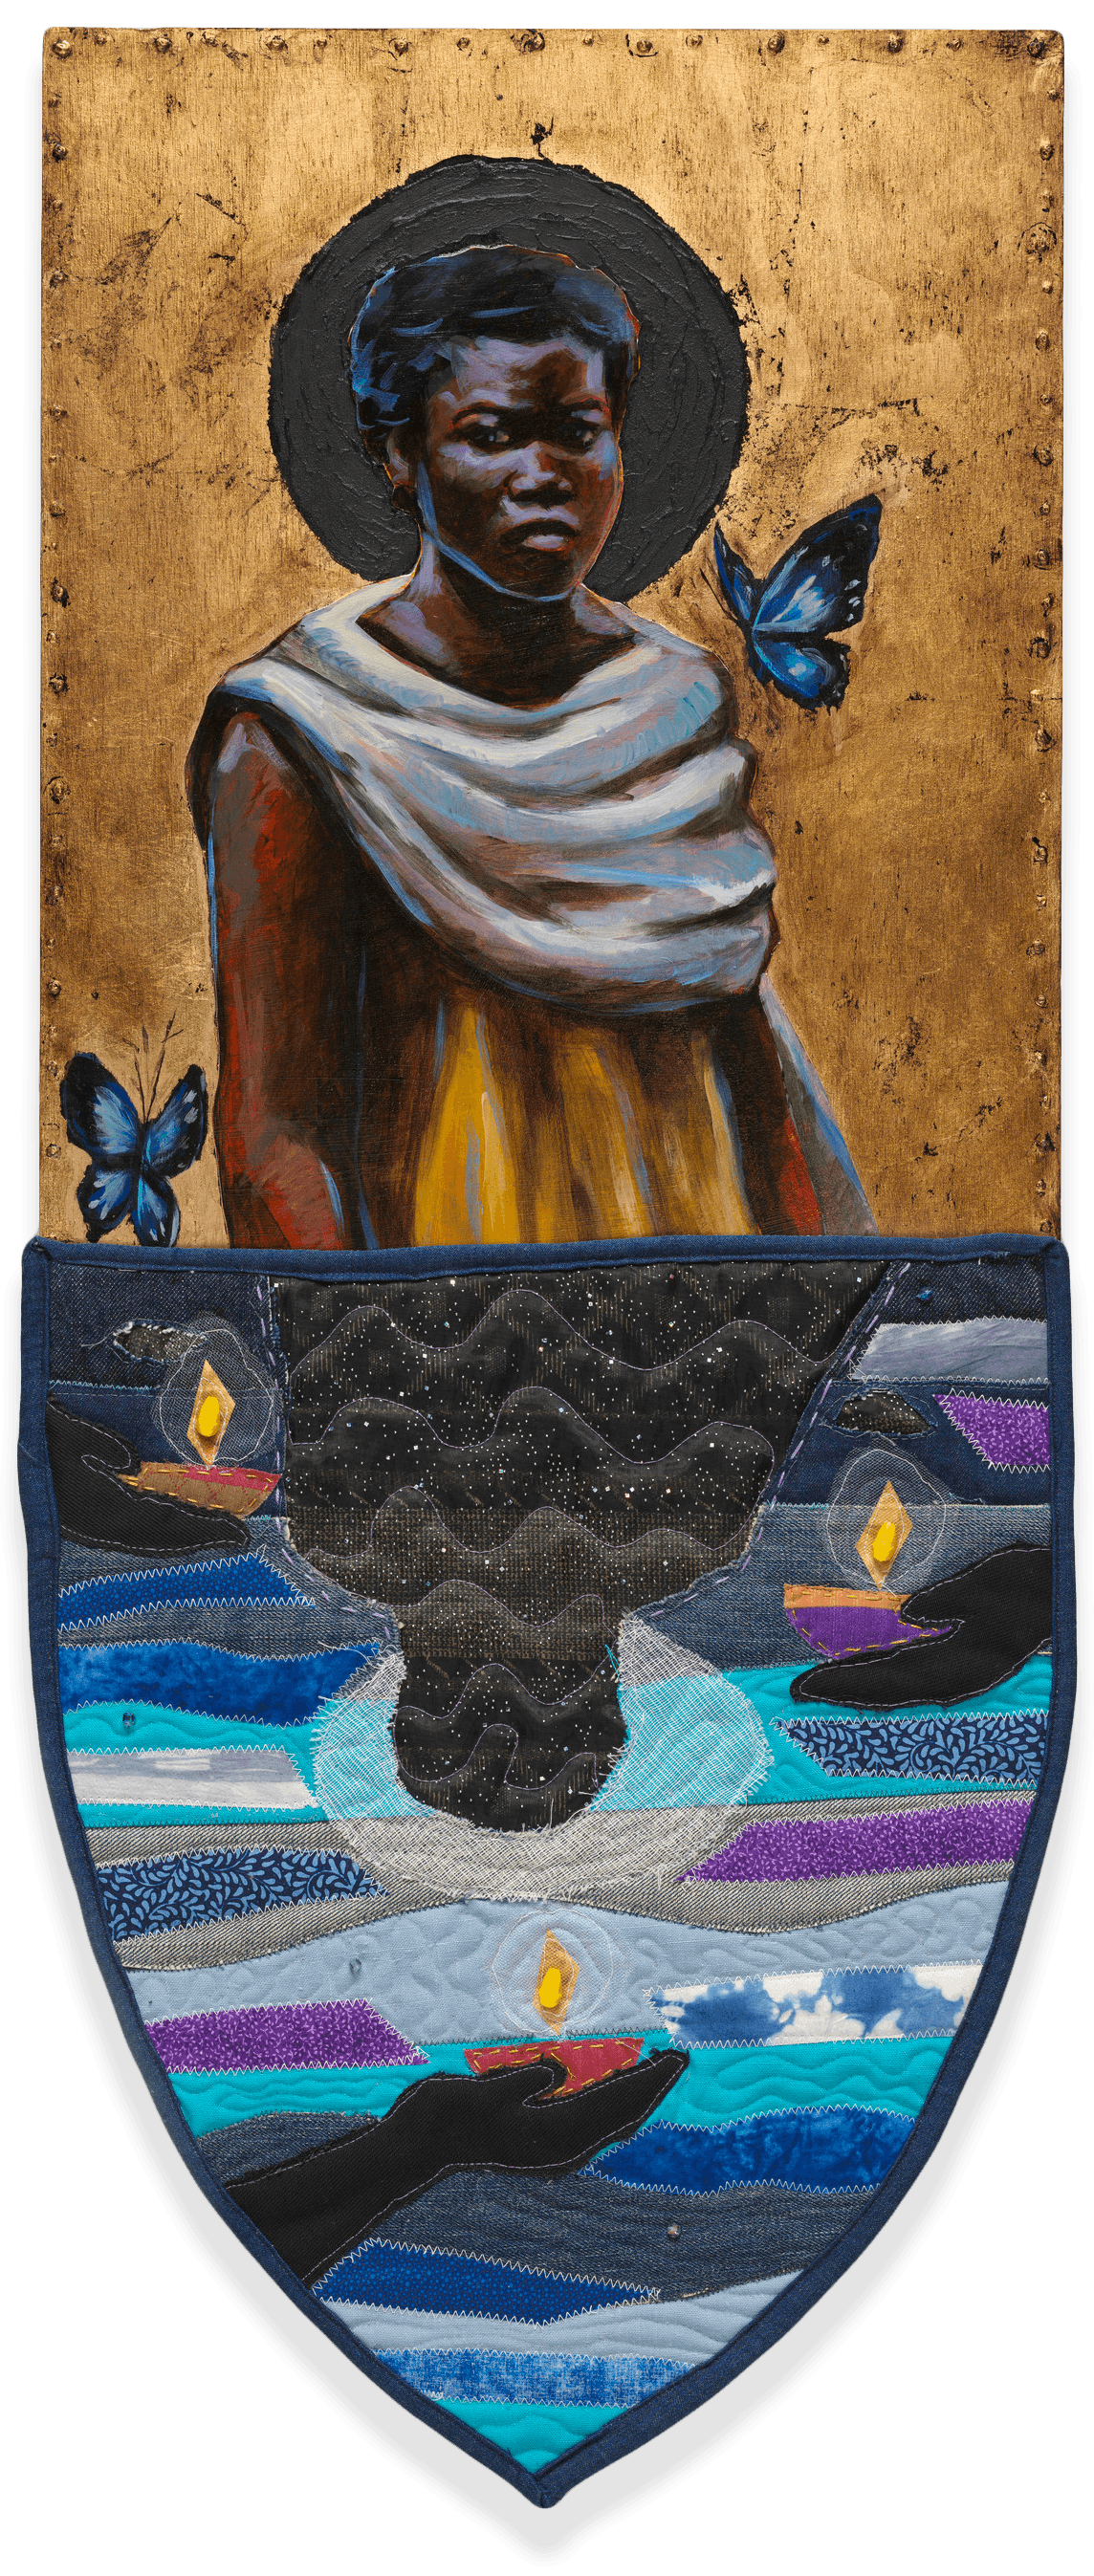 A mixed media piece of art by Stephen Towns that has a painting of a black woman and her standow reflected in the water.